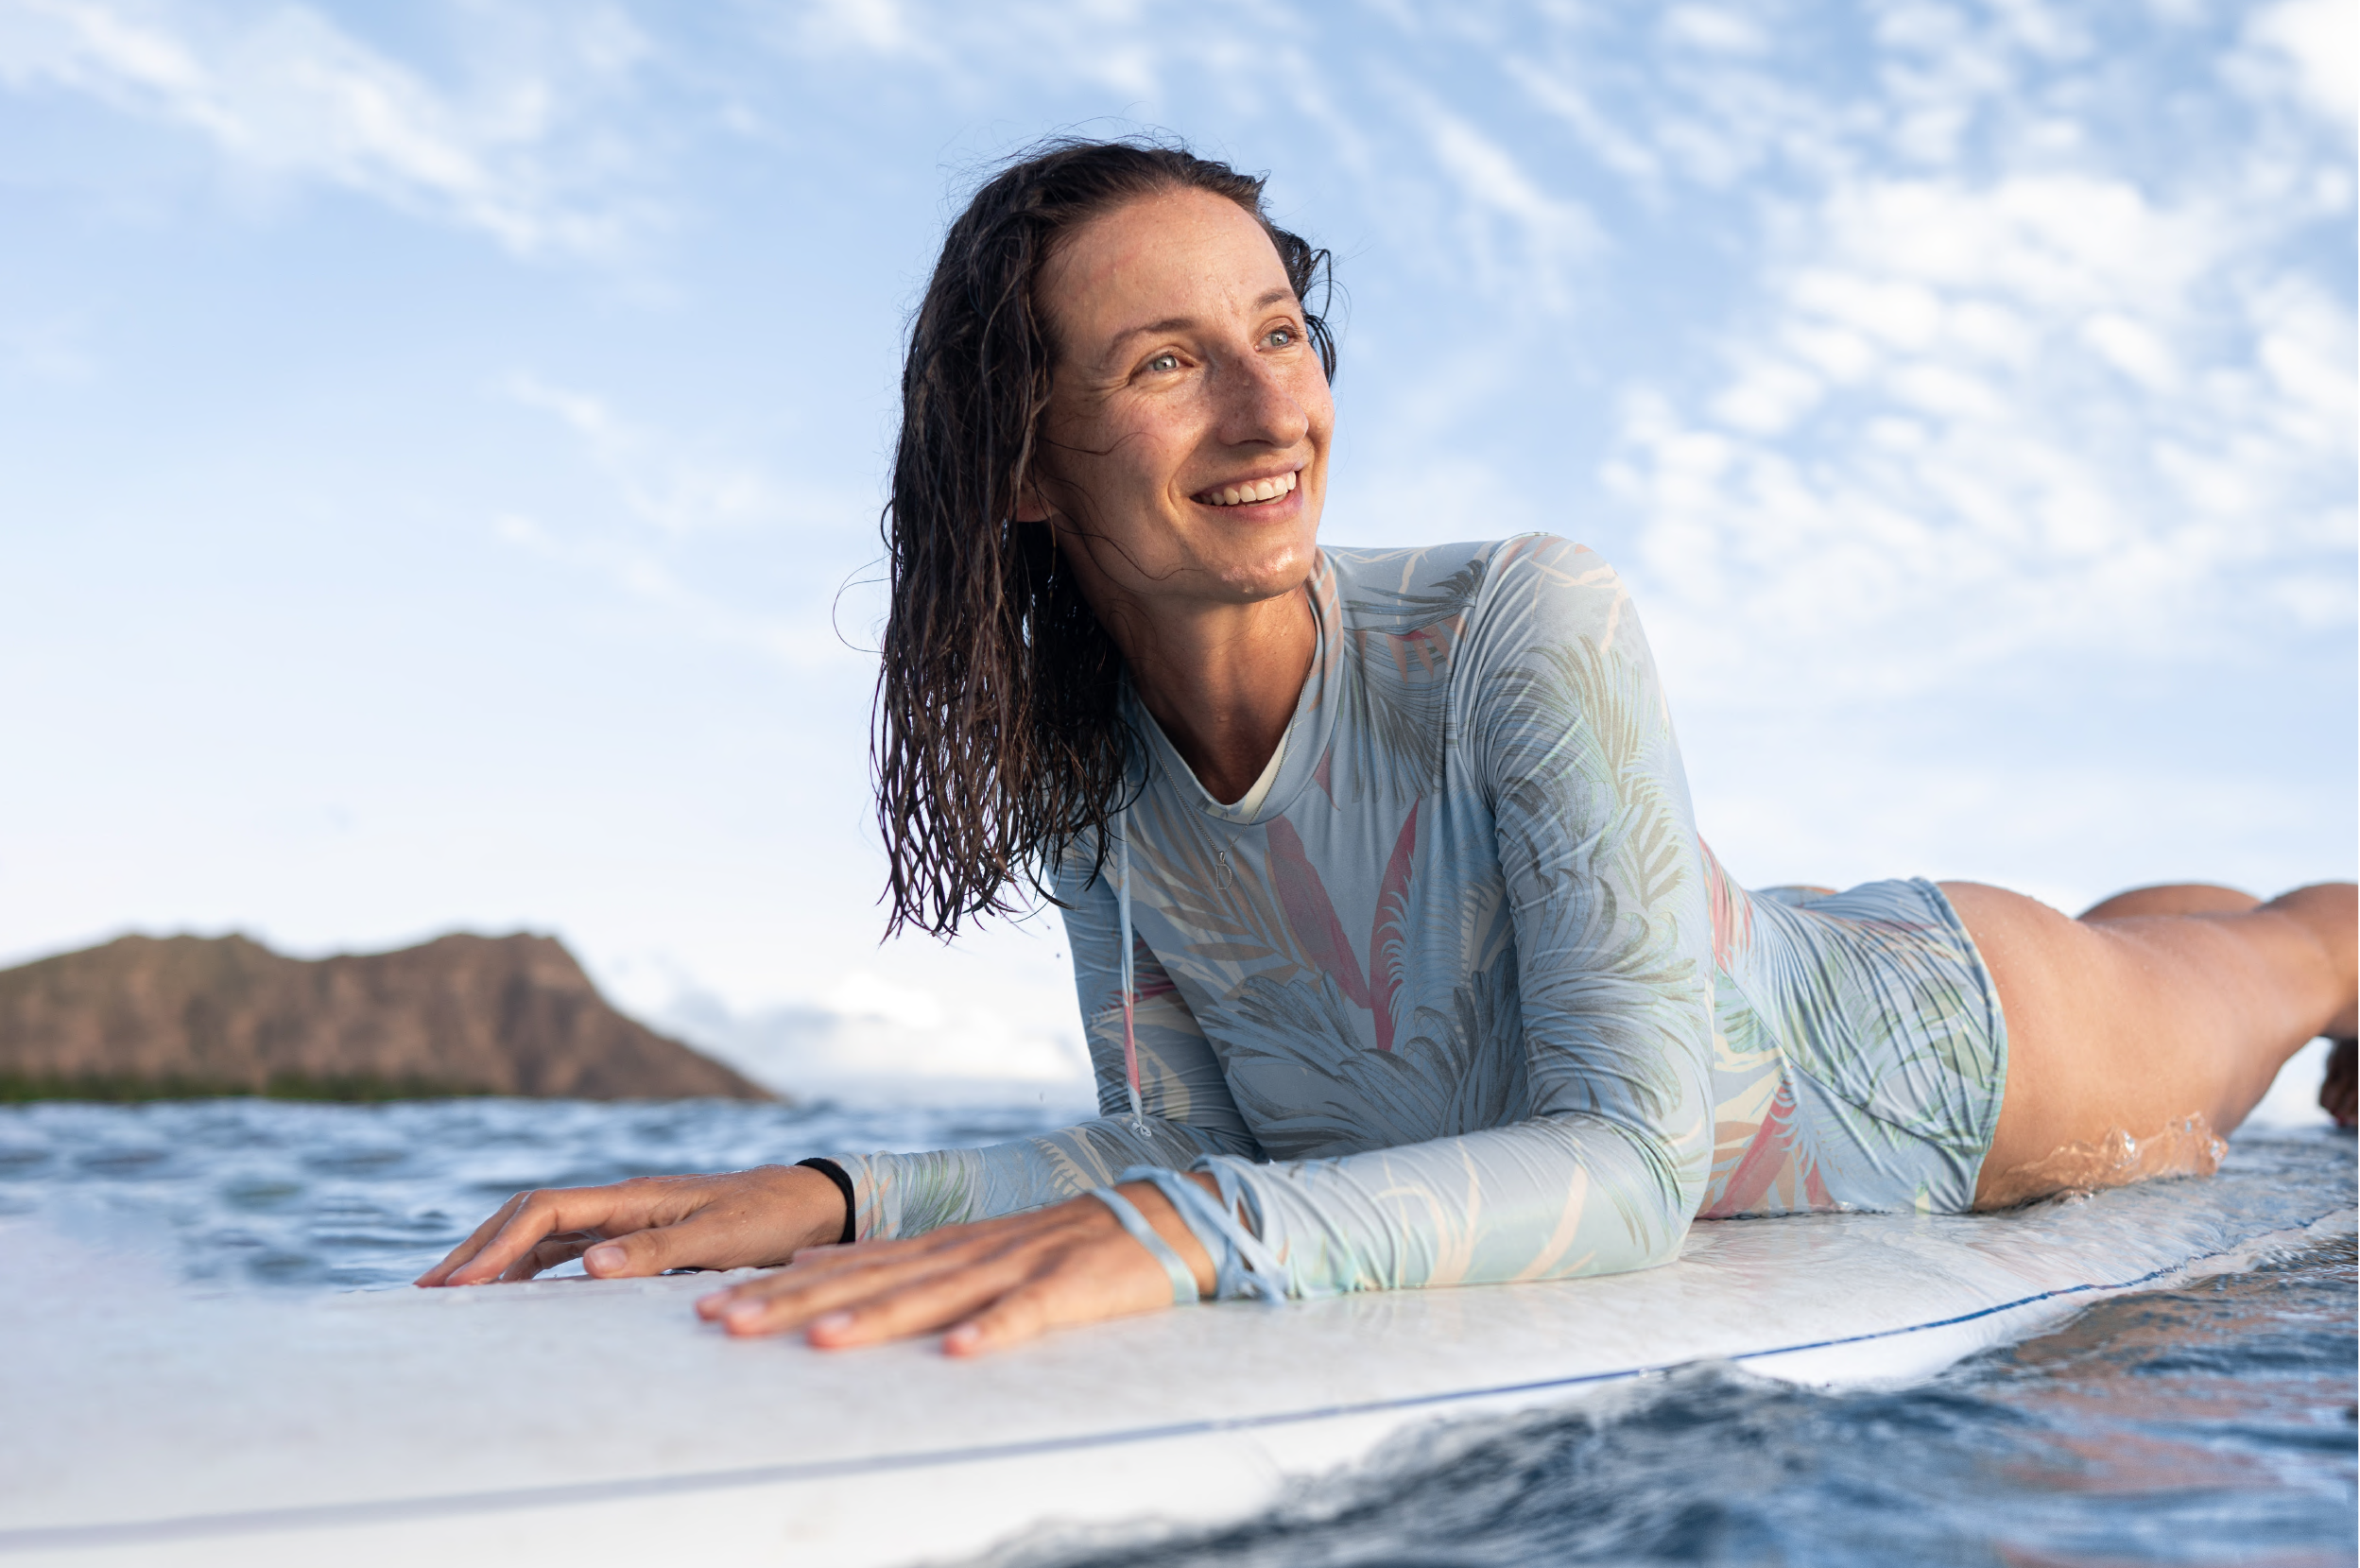 Woman smiling on a surf board in the ocean